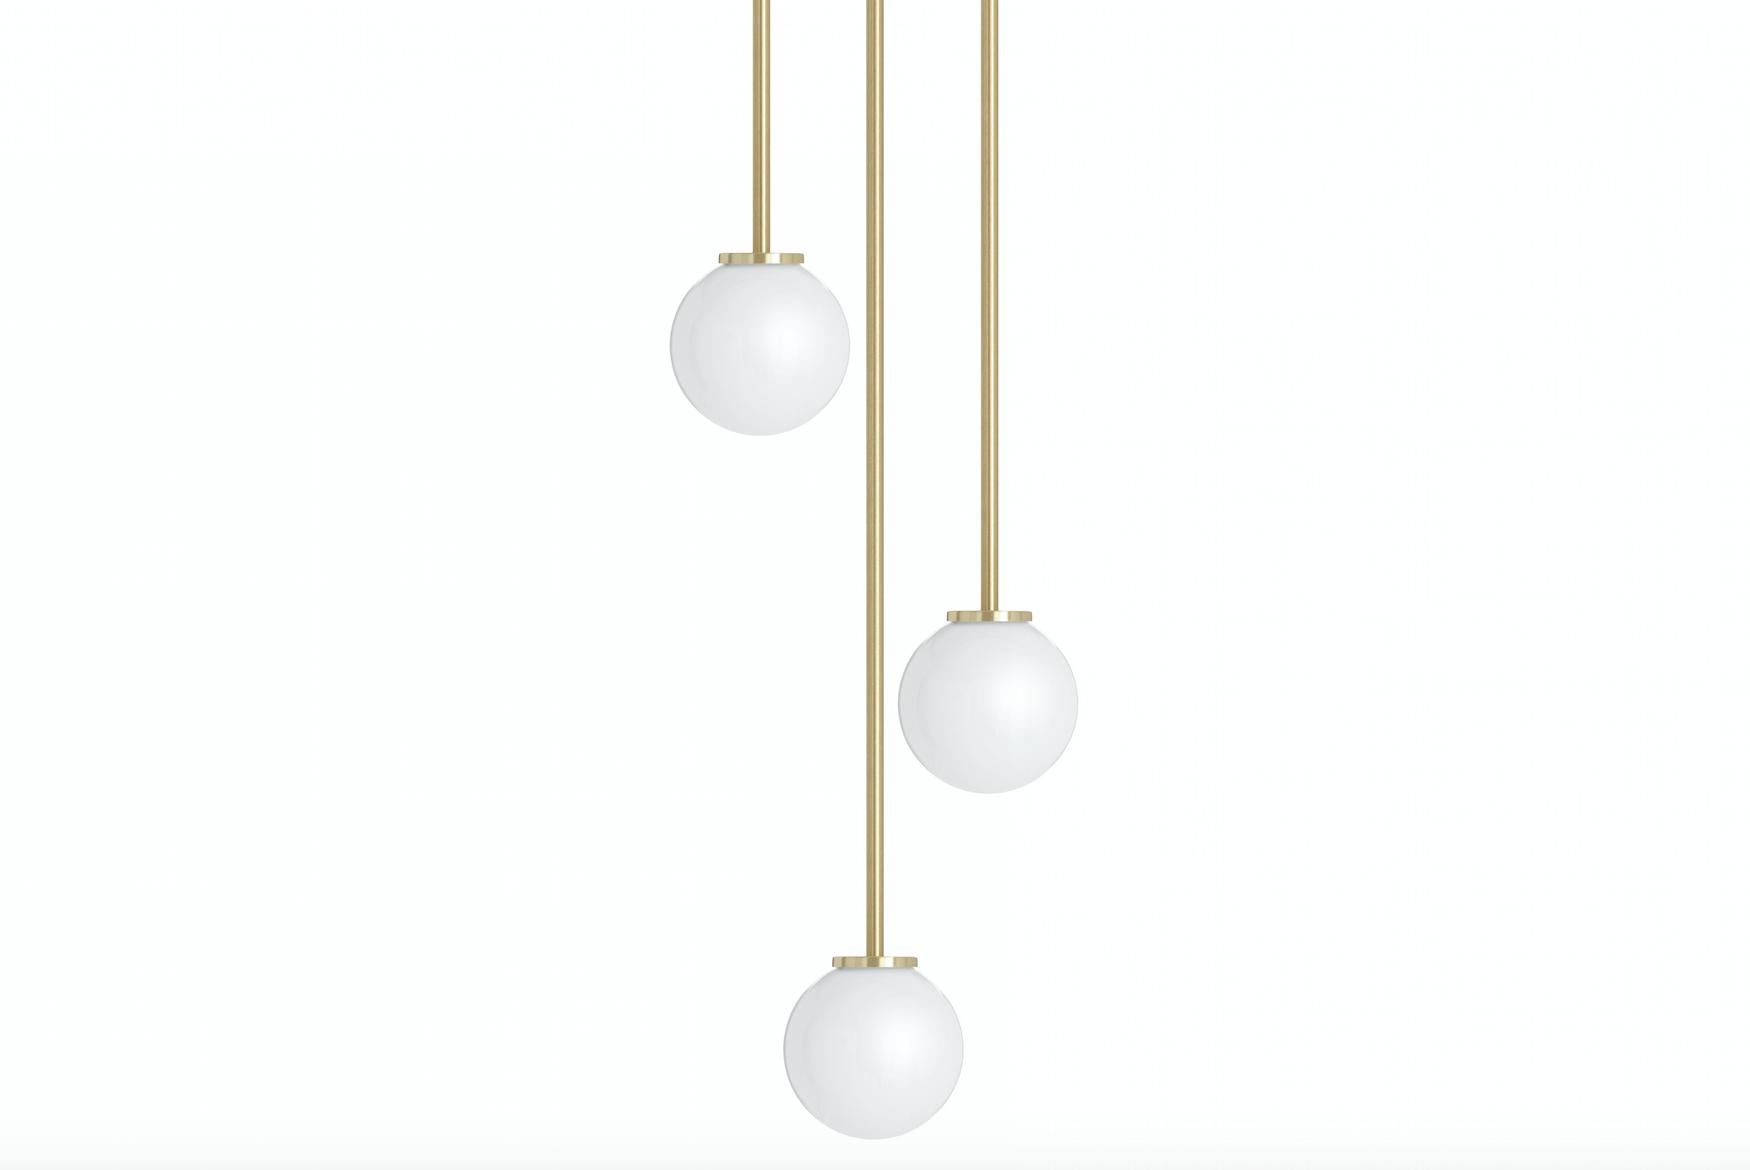 Mezzo cluster round by CTO Lighting
Materials: satin brass with opal glass shade.
Dimensions: H 15 (variable height) x W 37 cm
Also available:
Cluster round 4 - satin brass ceiling box only
Cluster round 5 - satin brass ceiling box